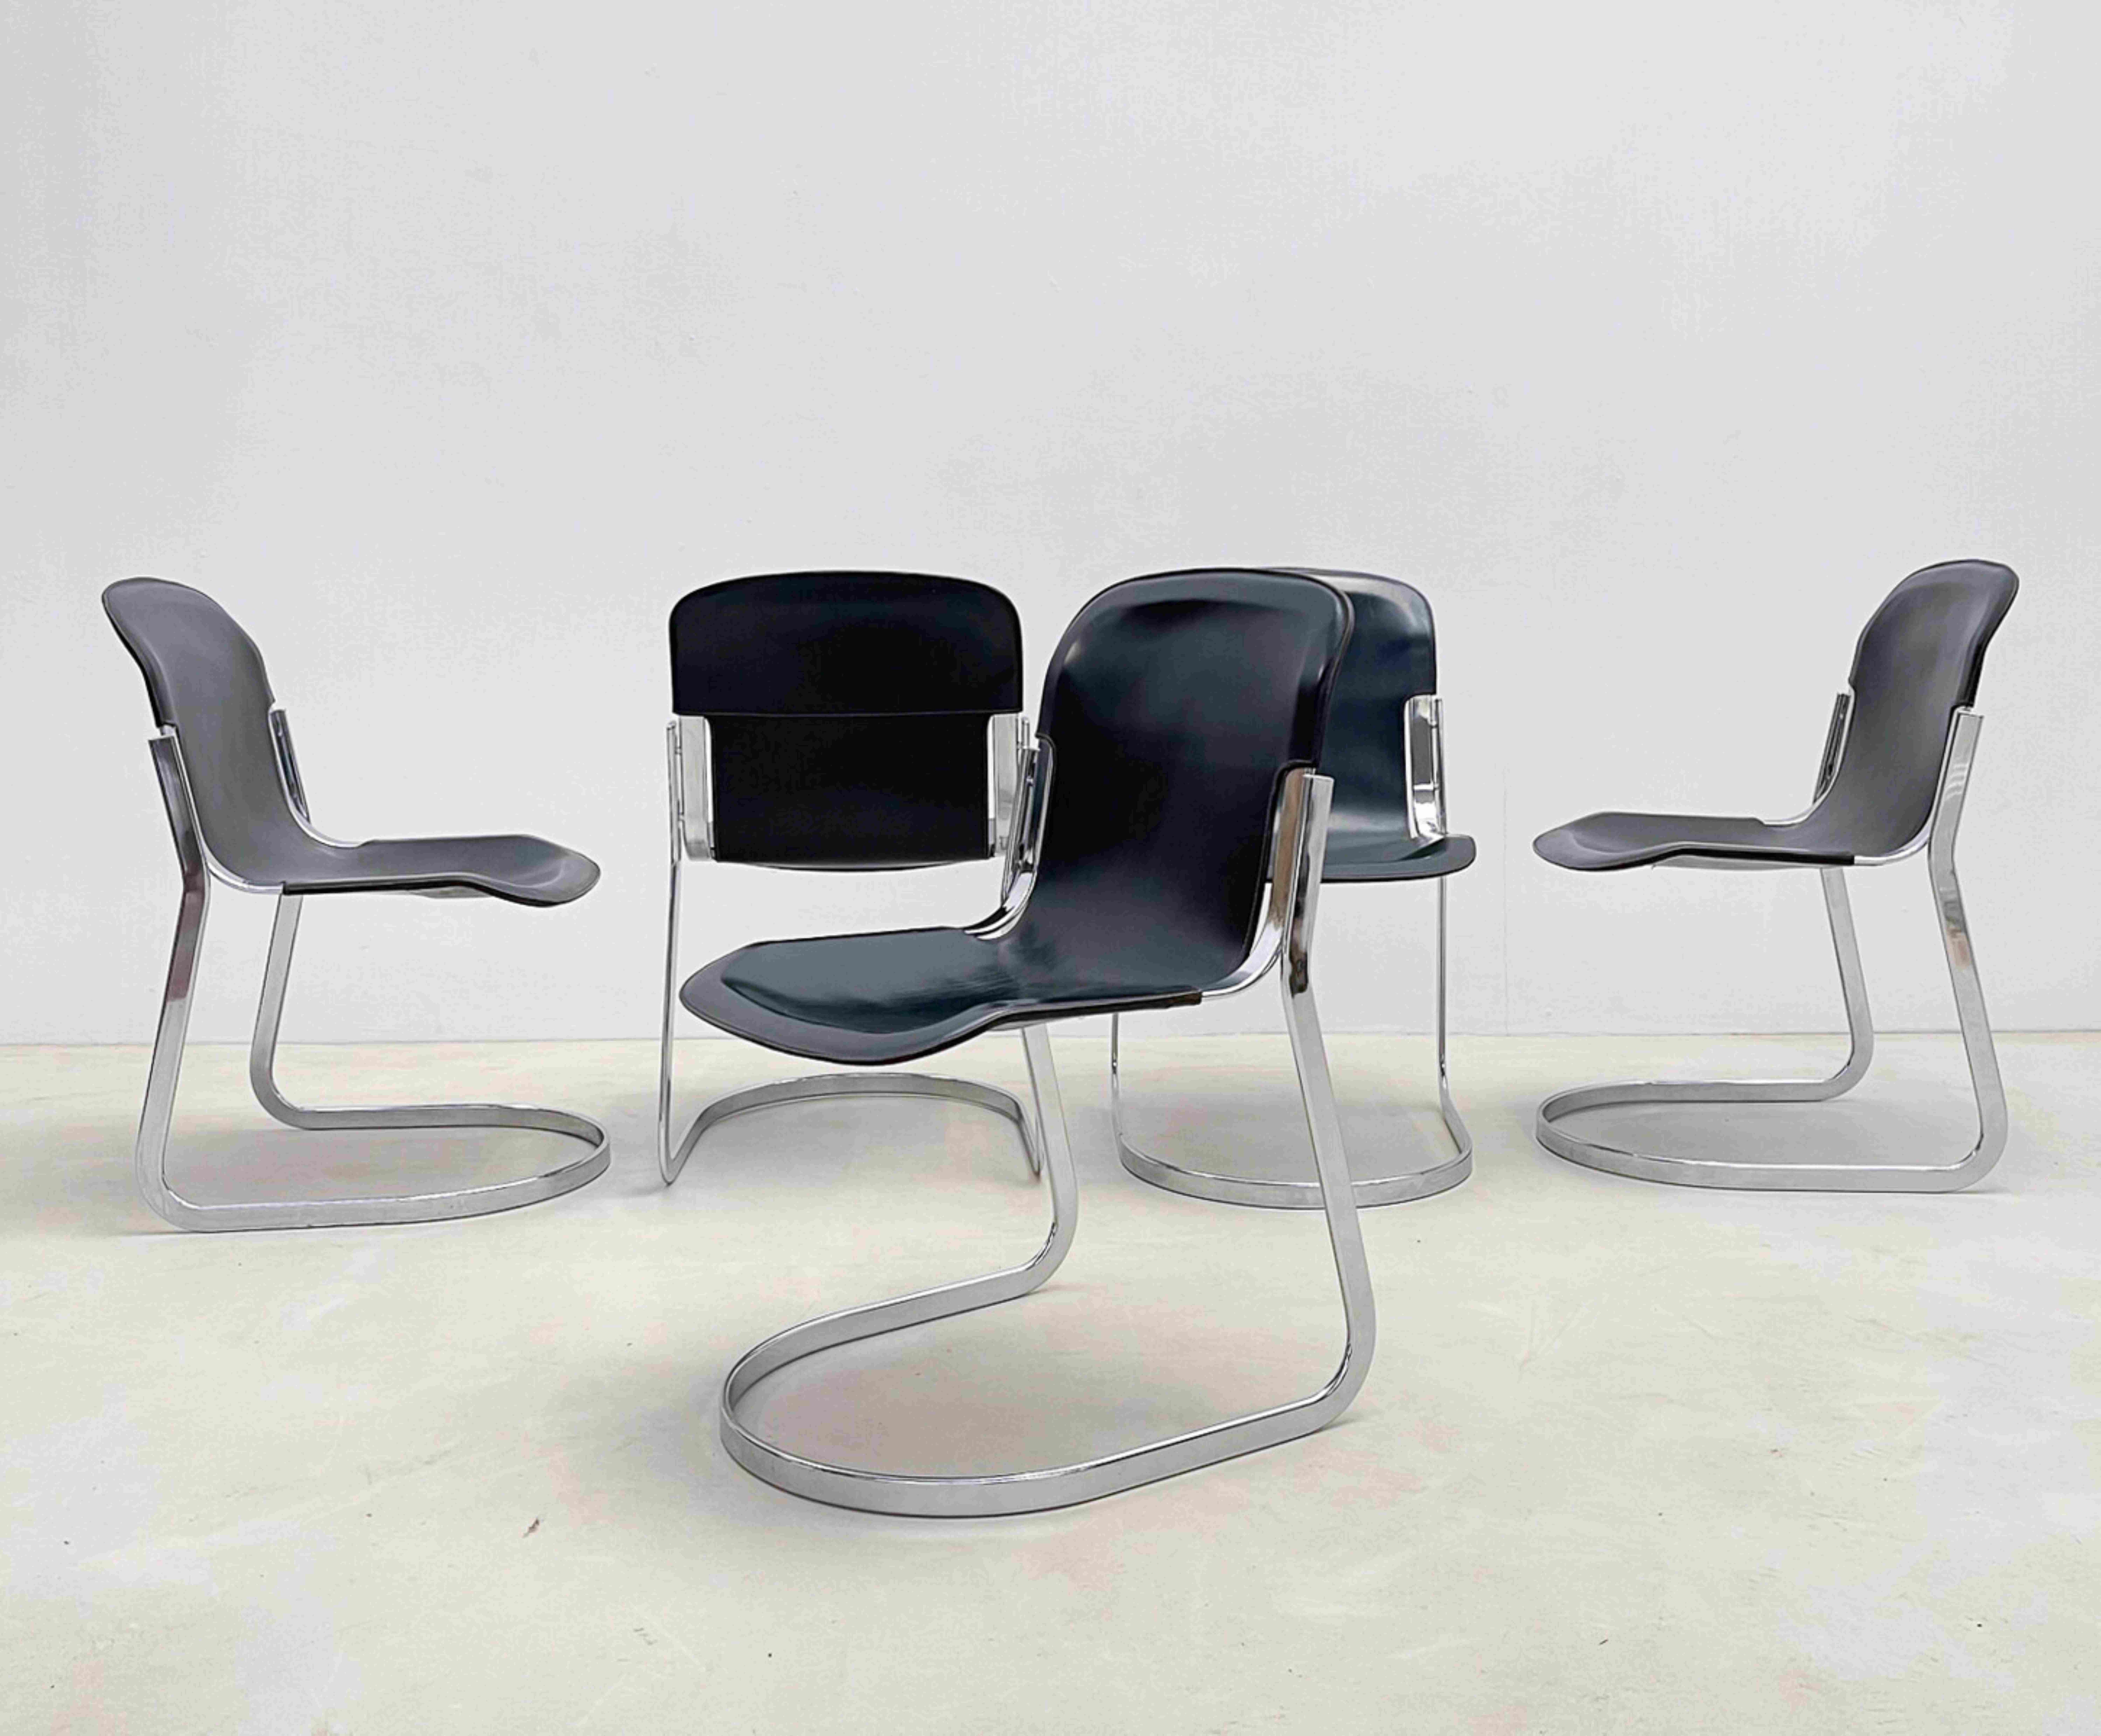 Set of 5 dining chairs by Willy Rizzo for Cidue, leather and steel, Italy, 1970s.